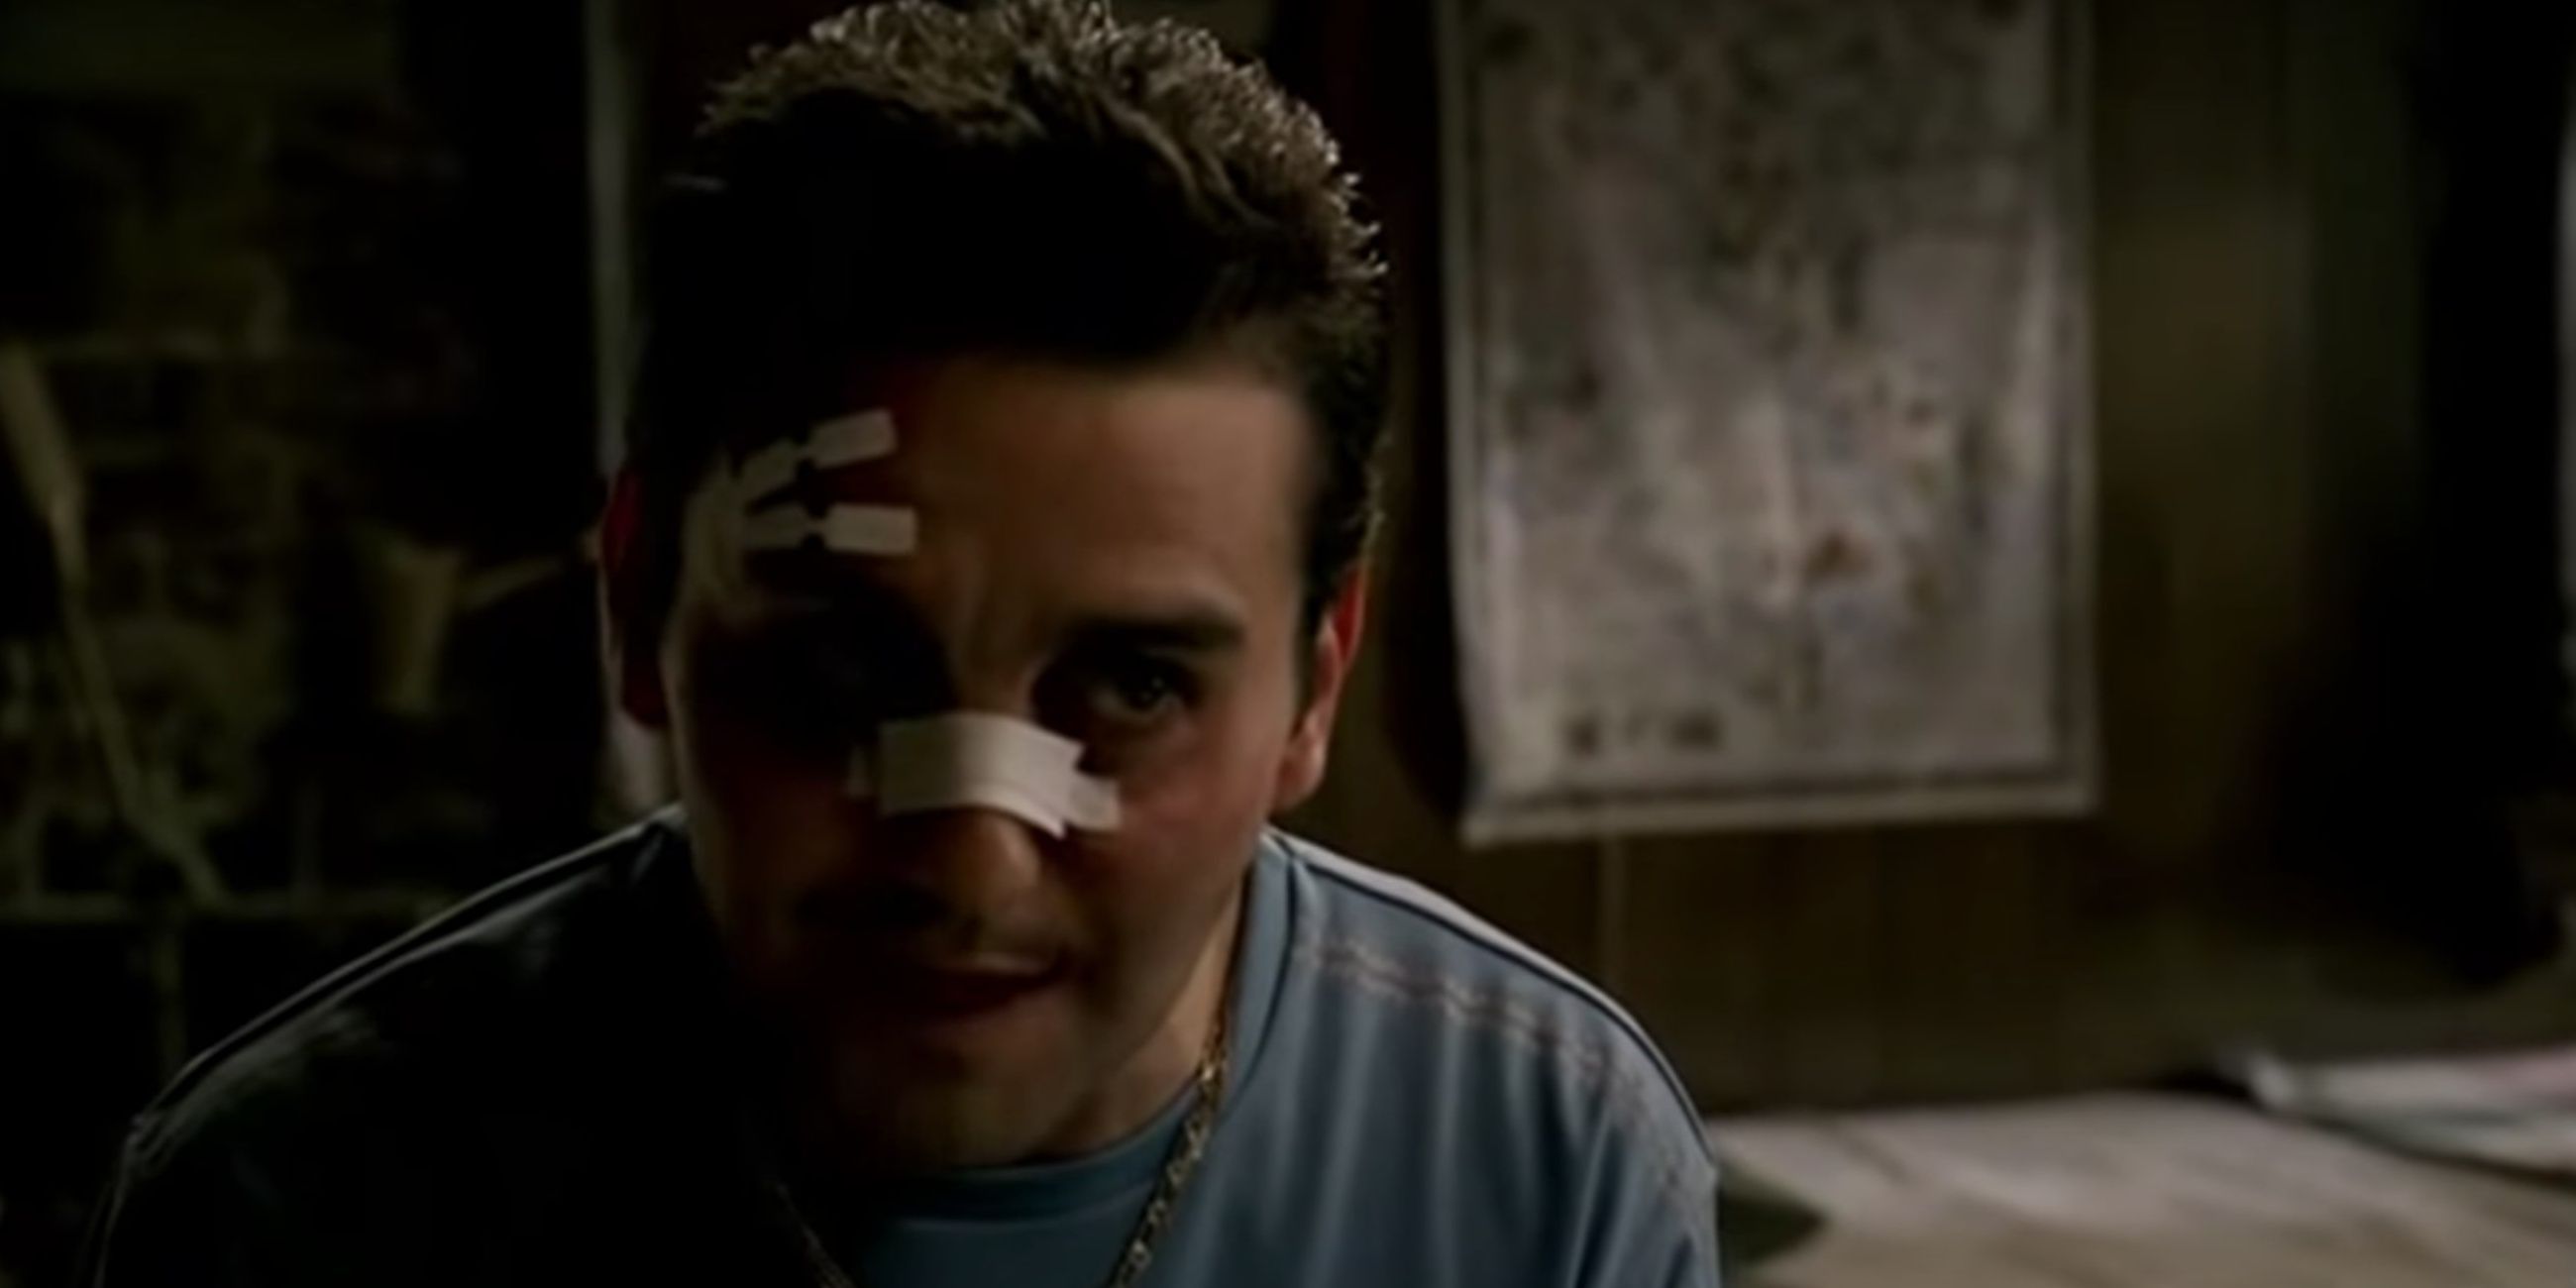 A bandaged Benny explaisn to Tony what happened in The Sopranos